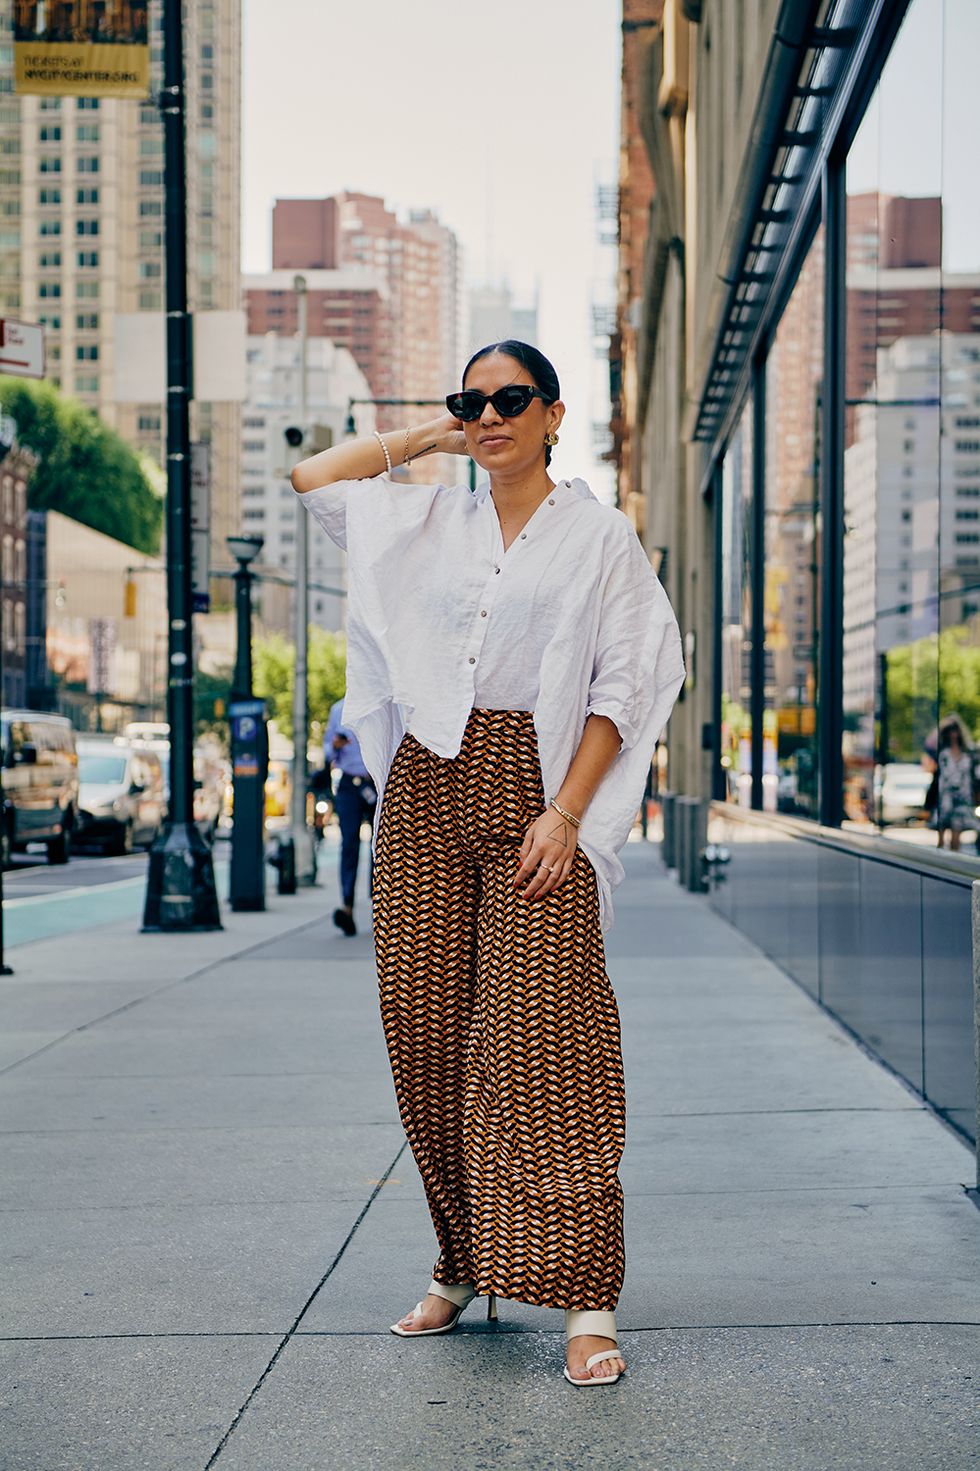 Outfit inspiration for business casual office wear - The Career Edit